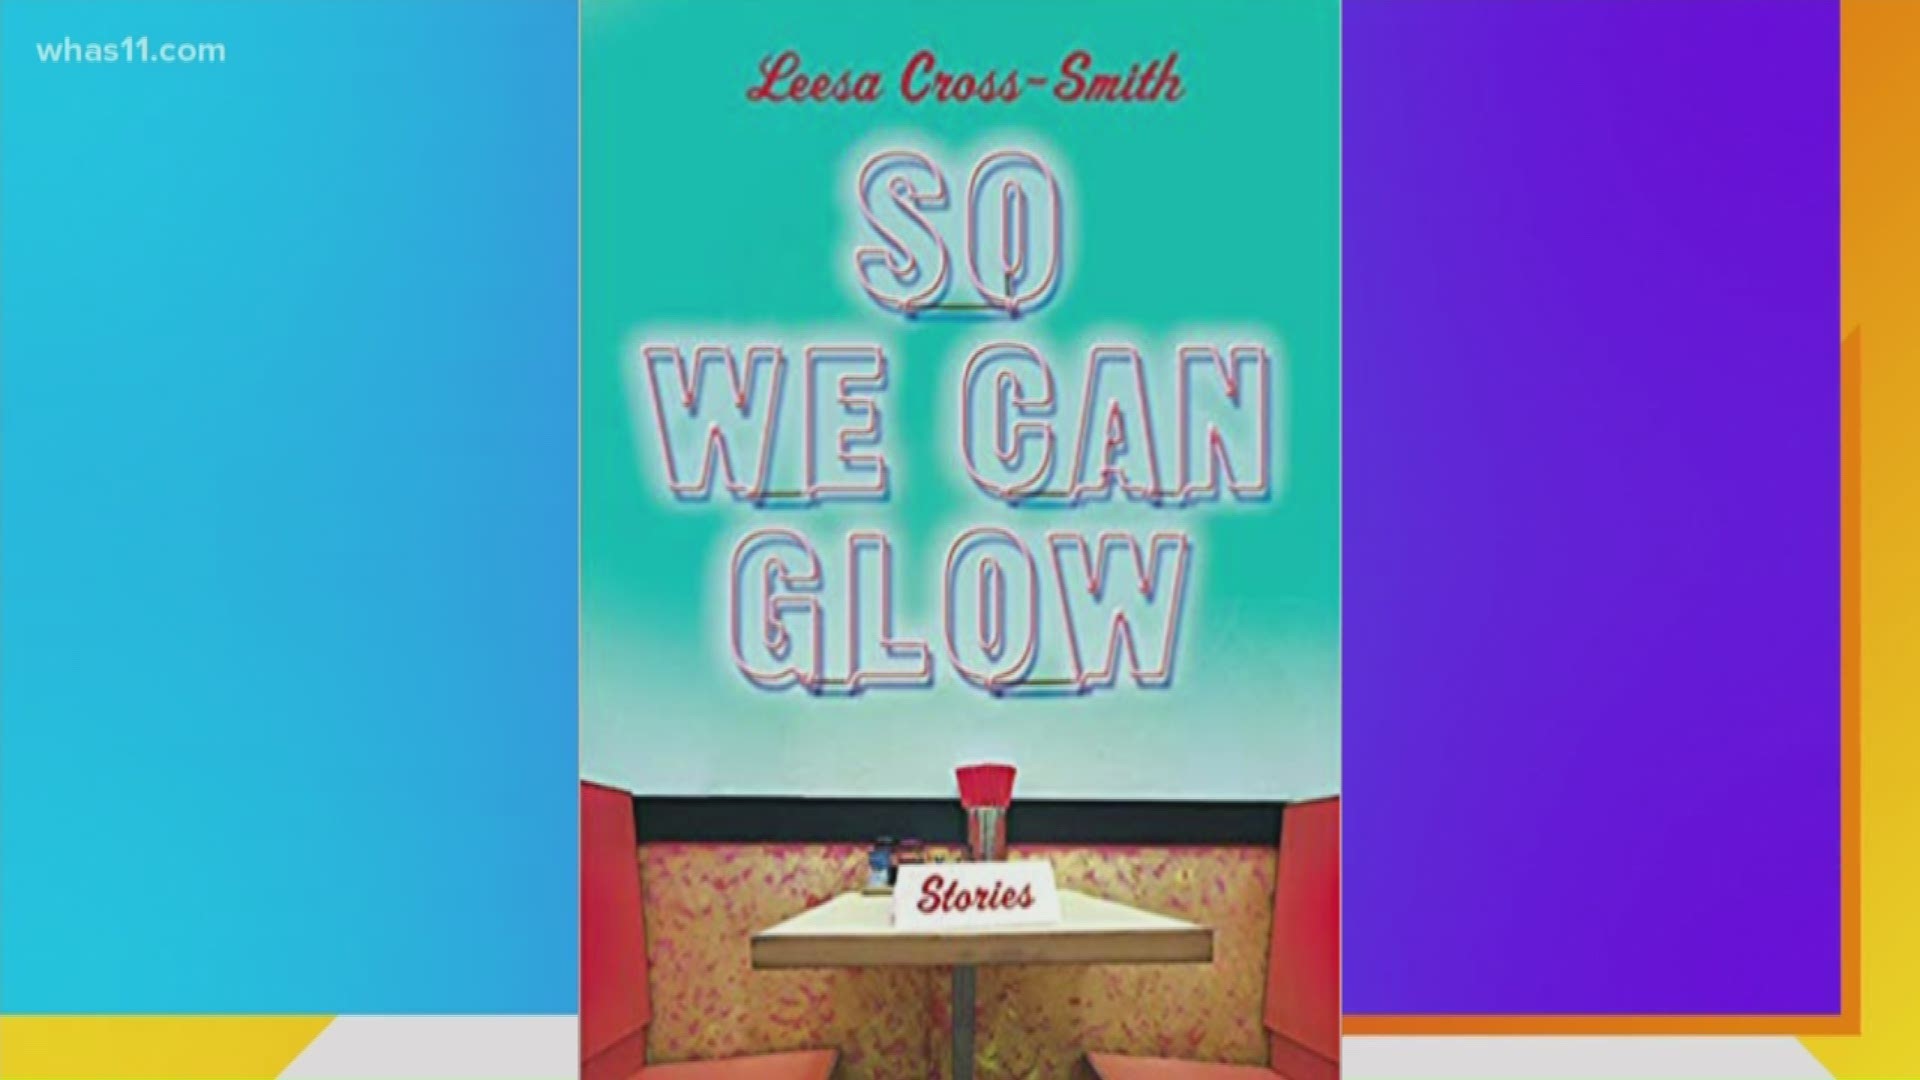 Author Leesa Cross-Smith's new book, "So We Can Glow," is available at bookstores and online. Keeep up with her at LeesaCrossSmith.com.